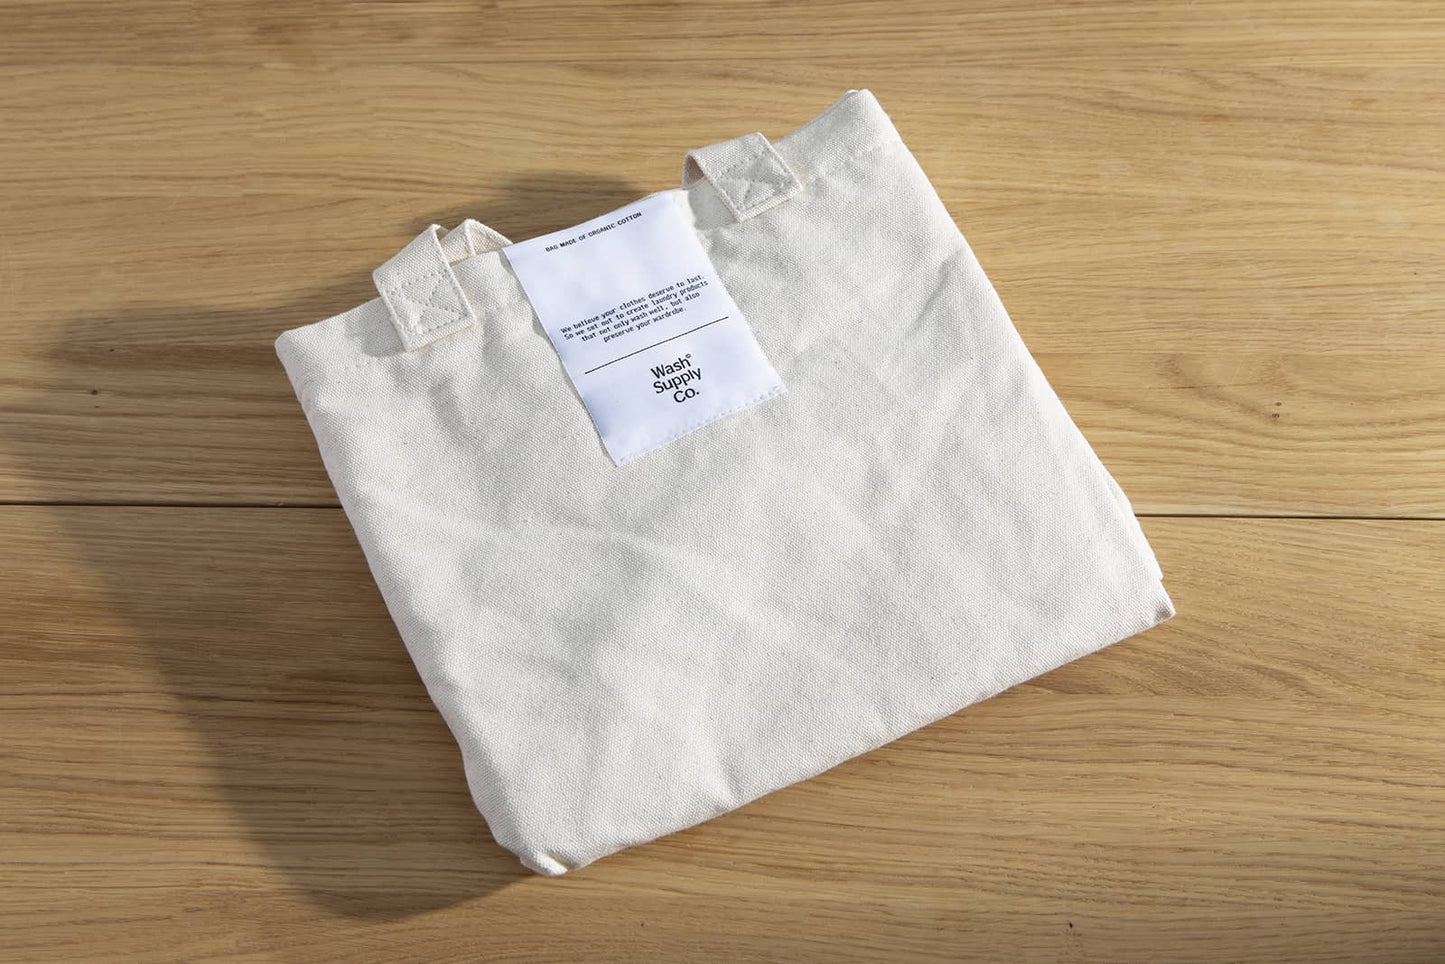 Say bye-bye to that old plastic IKEA shopping bag you used to lug around your laundry in.